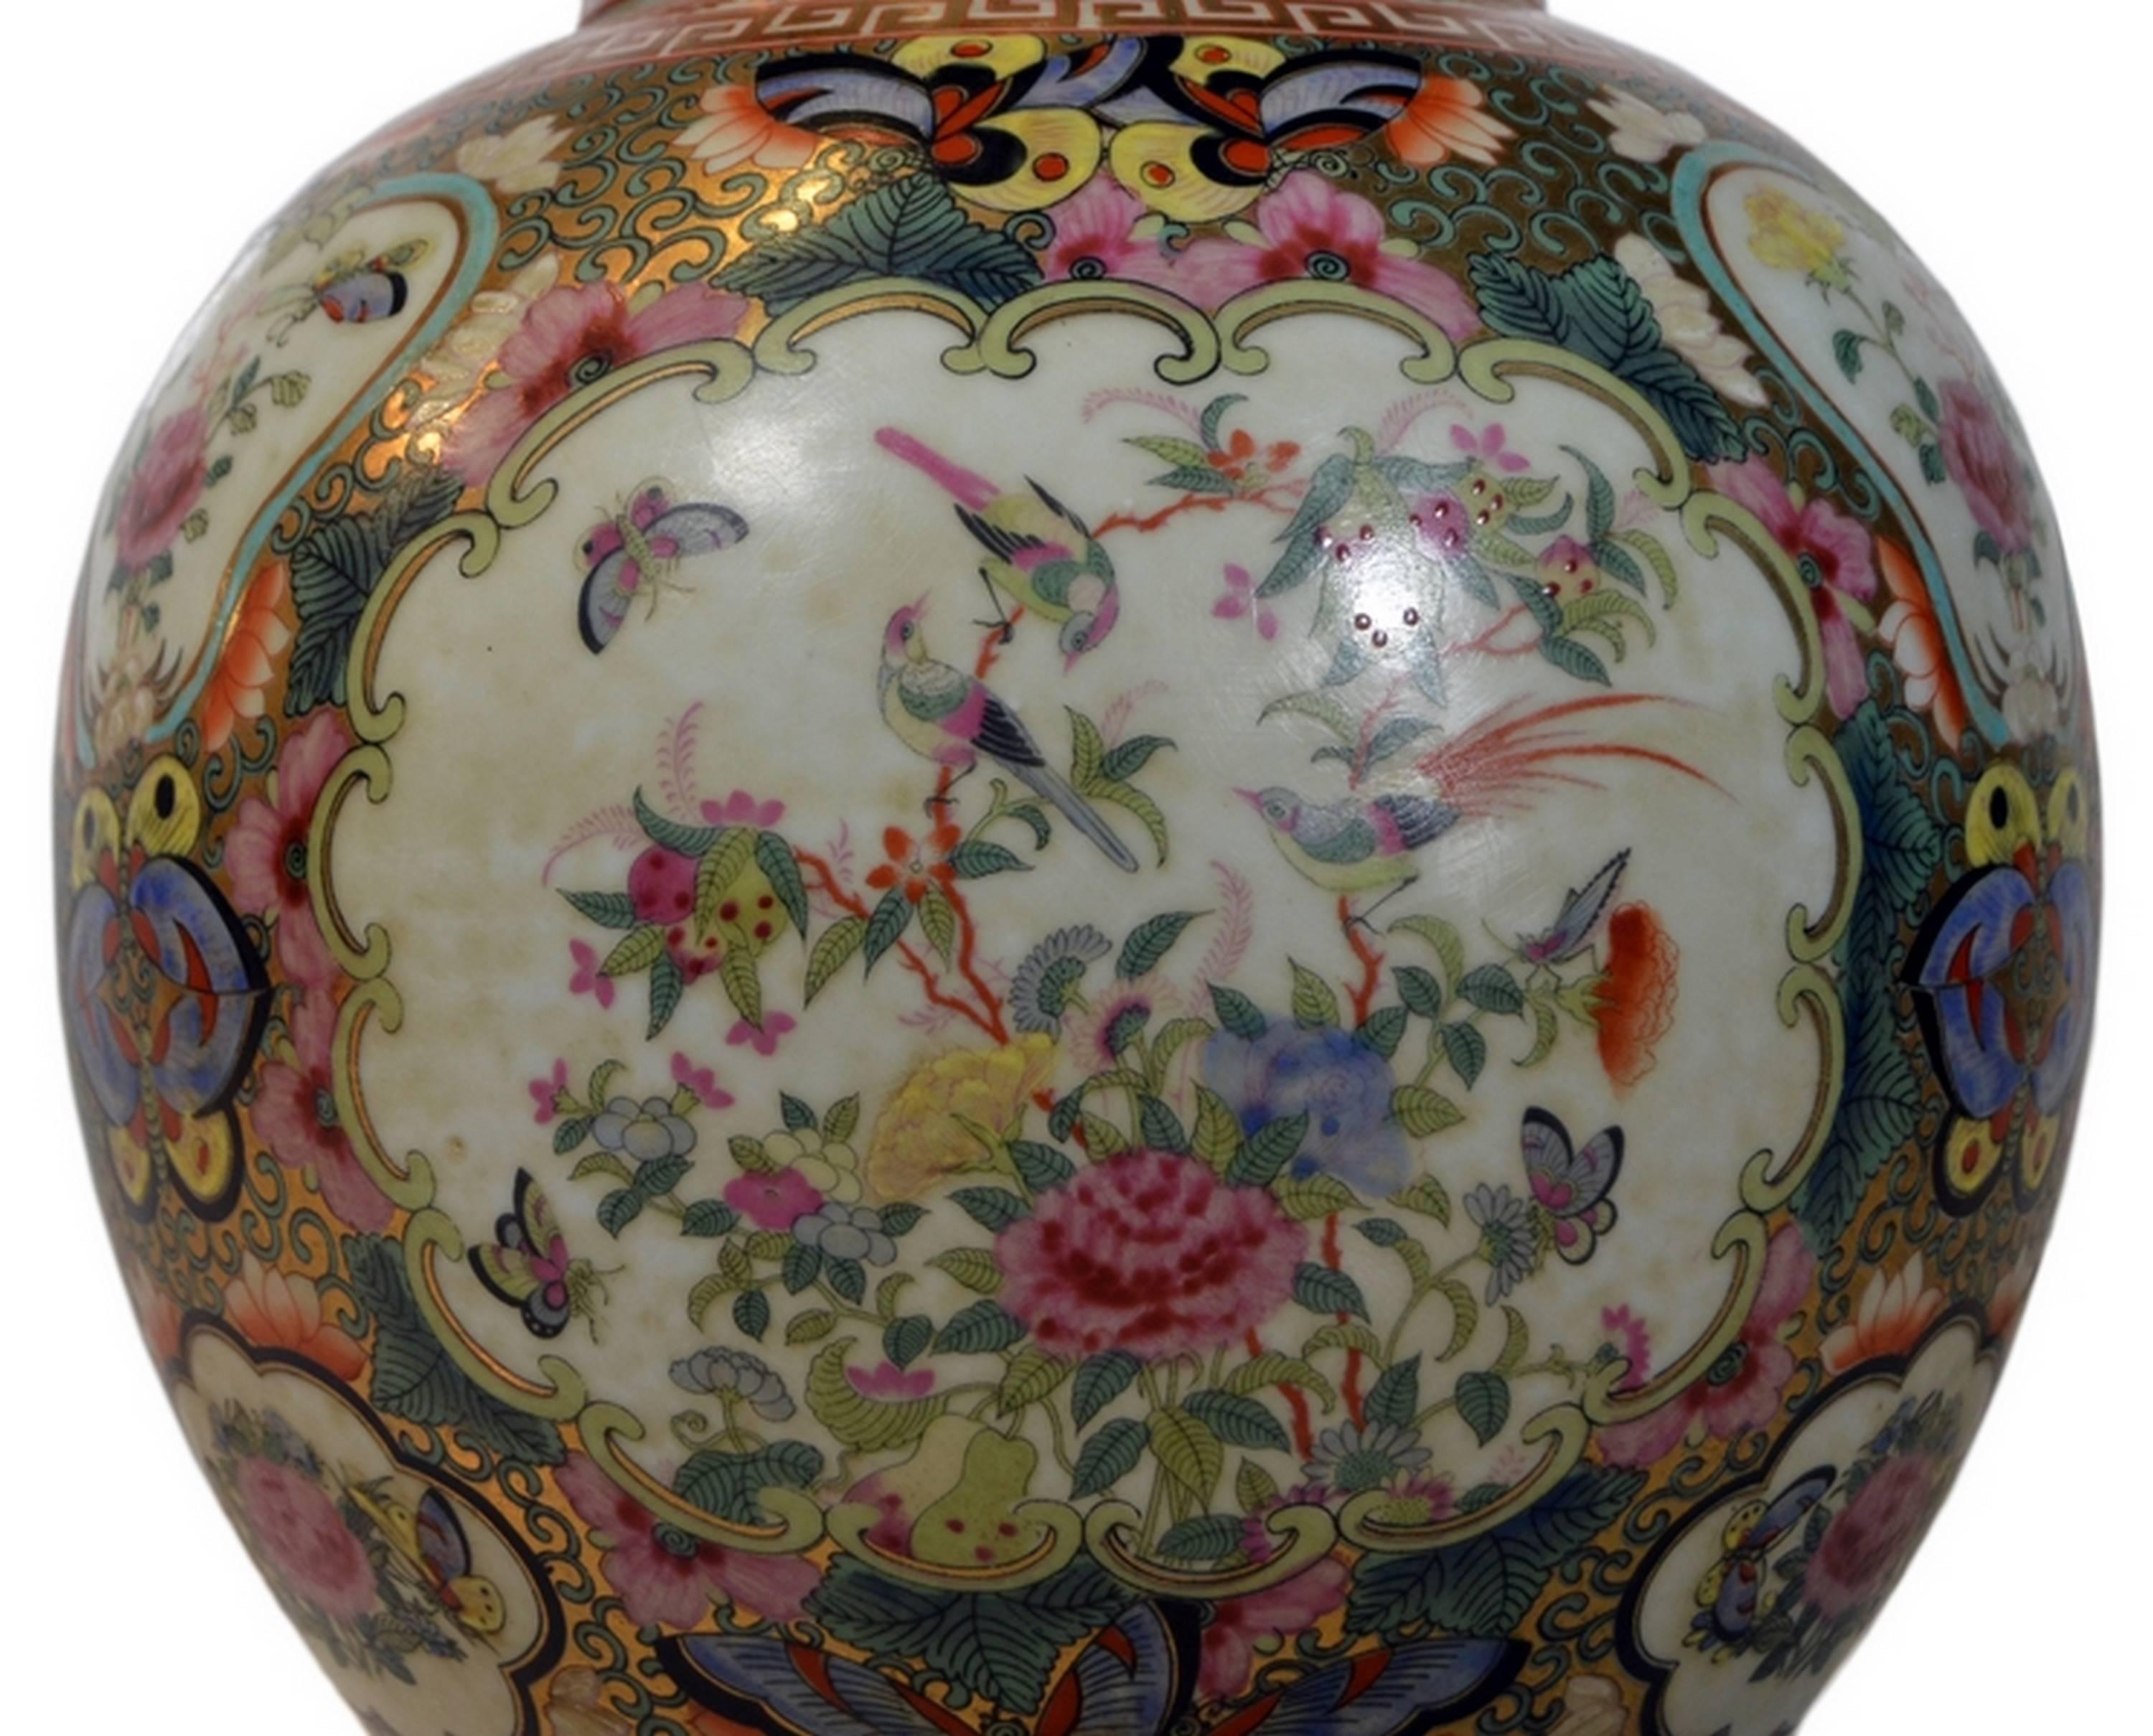 20th Century Vintage Hand-Painted Porcelain Lamp with Chinoiserie from 1970s, China